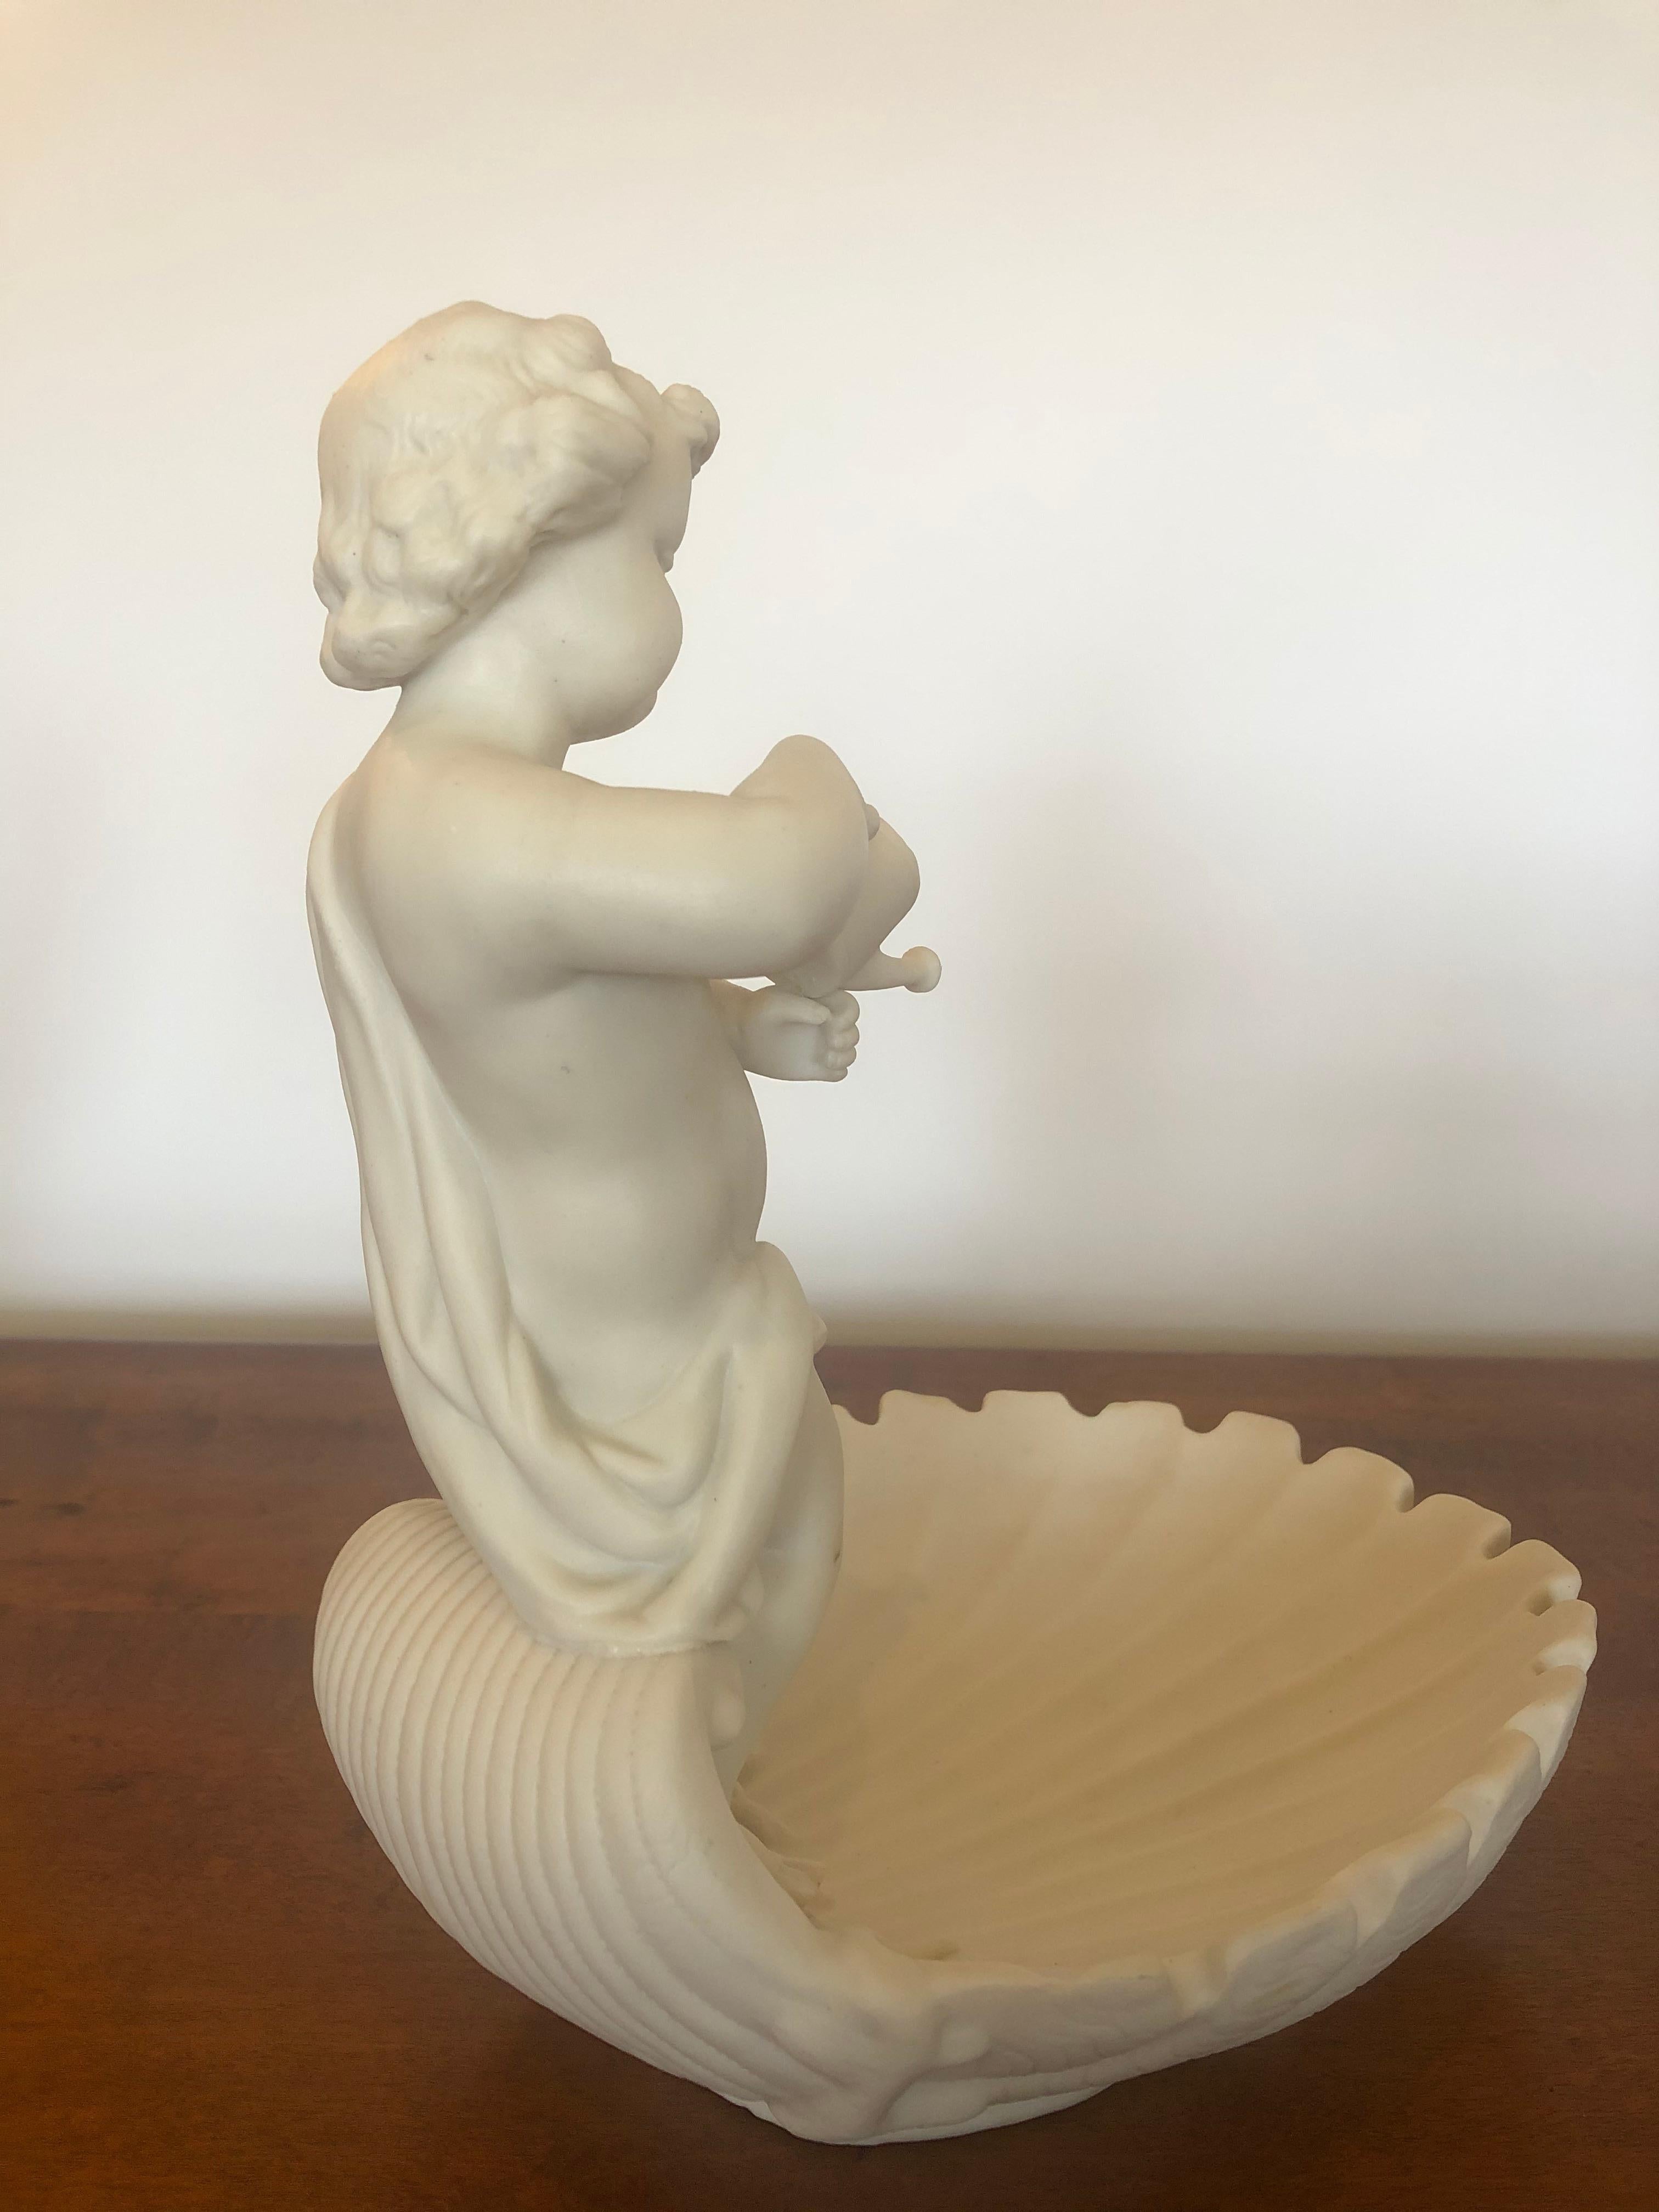 Magical Parian Porcelain Shell Motif Dish with Sculptural Putti In Good Condition For Sale In Hopewell, NJ